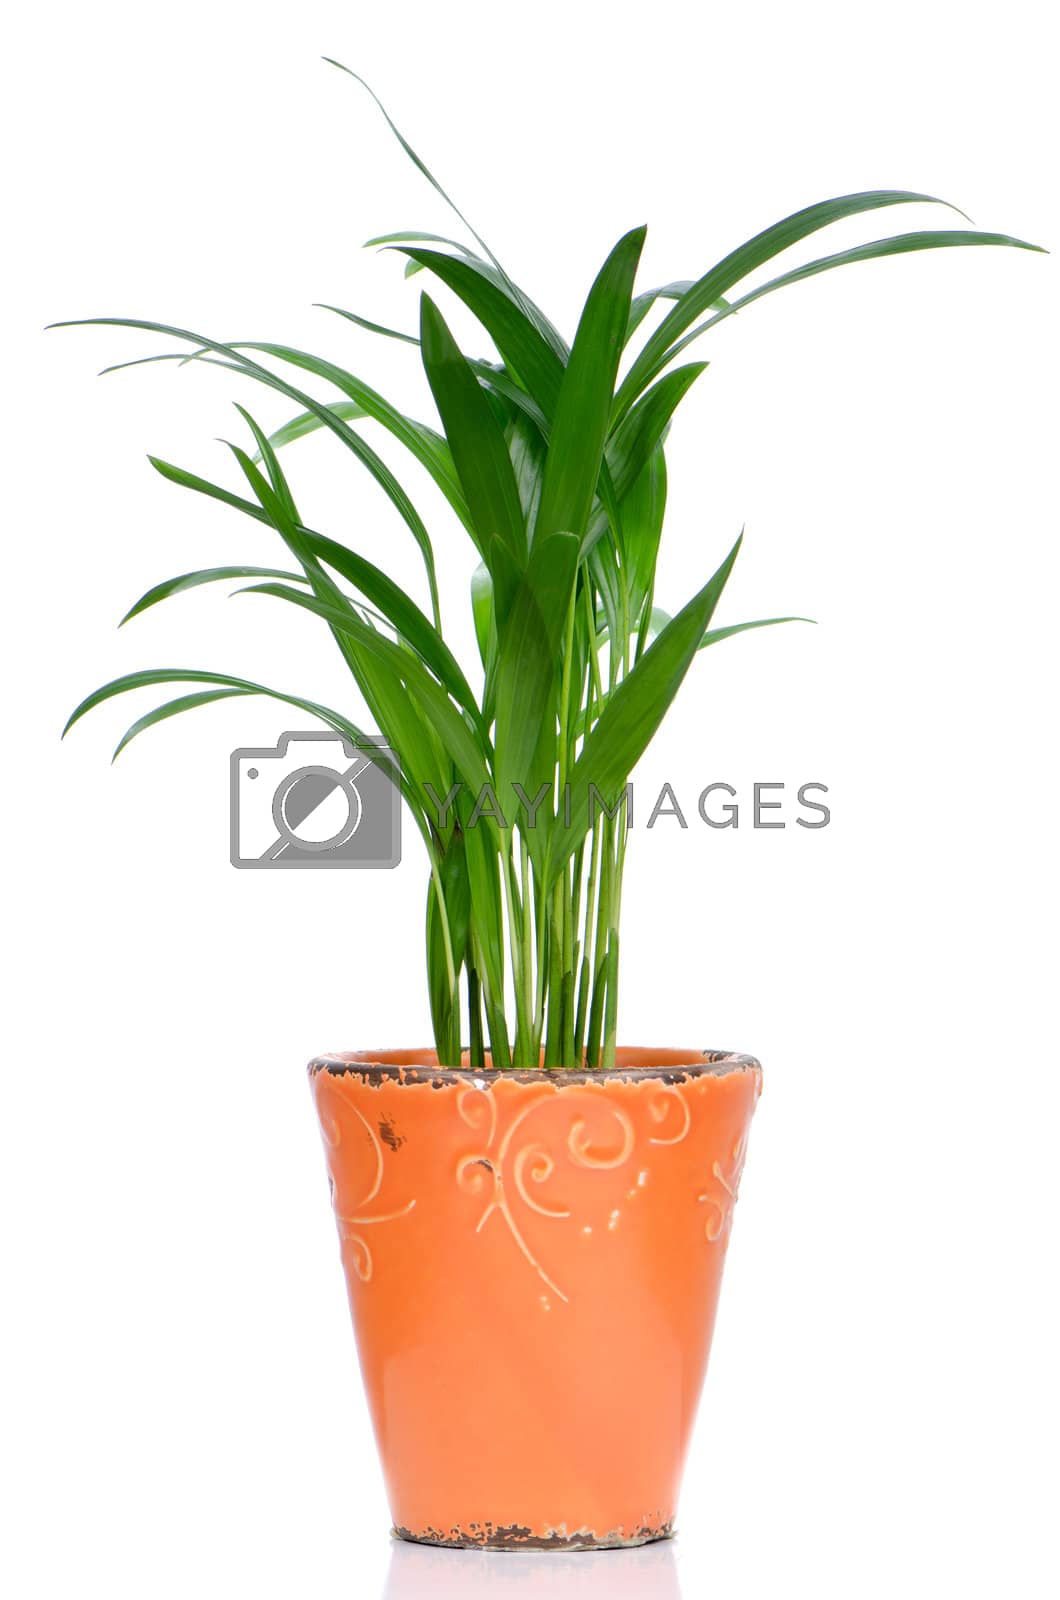 Royalty free image of Houseplant by homydesign